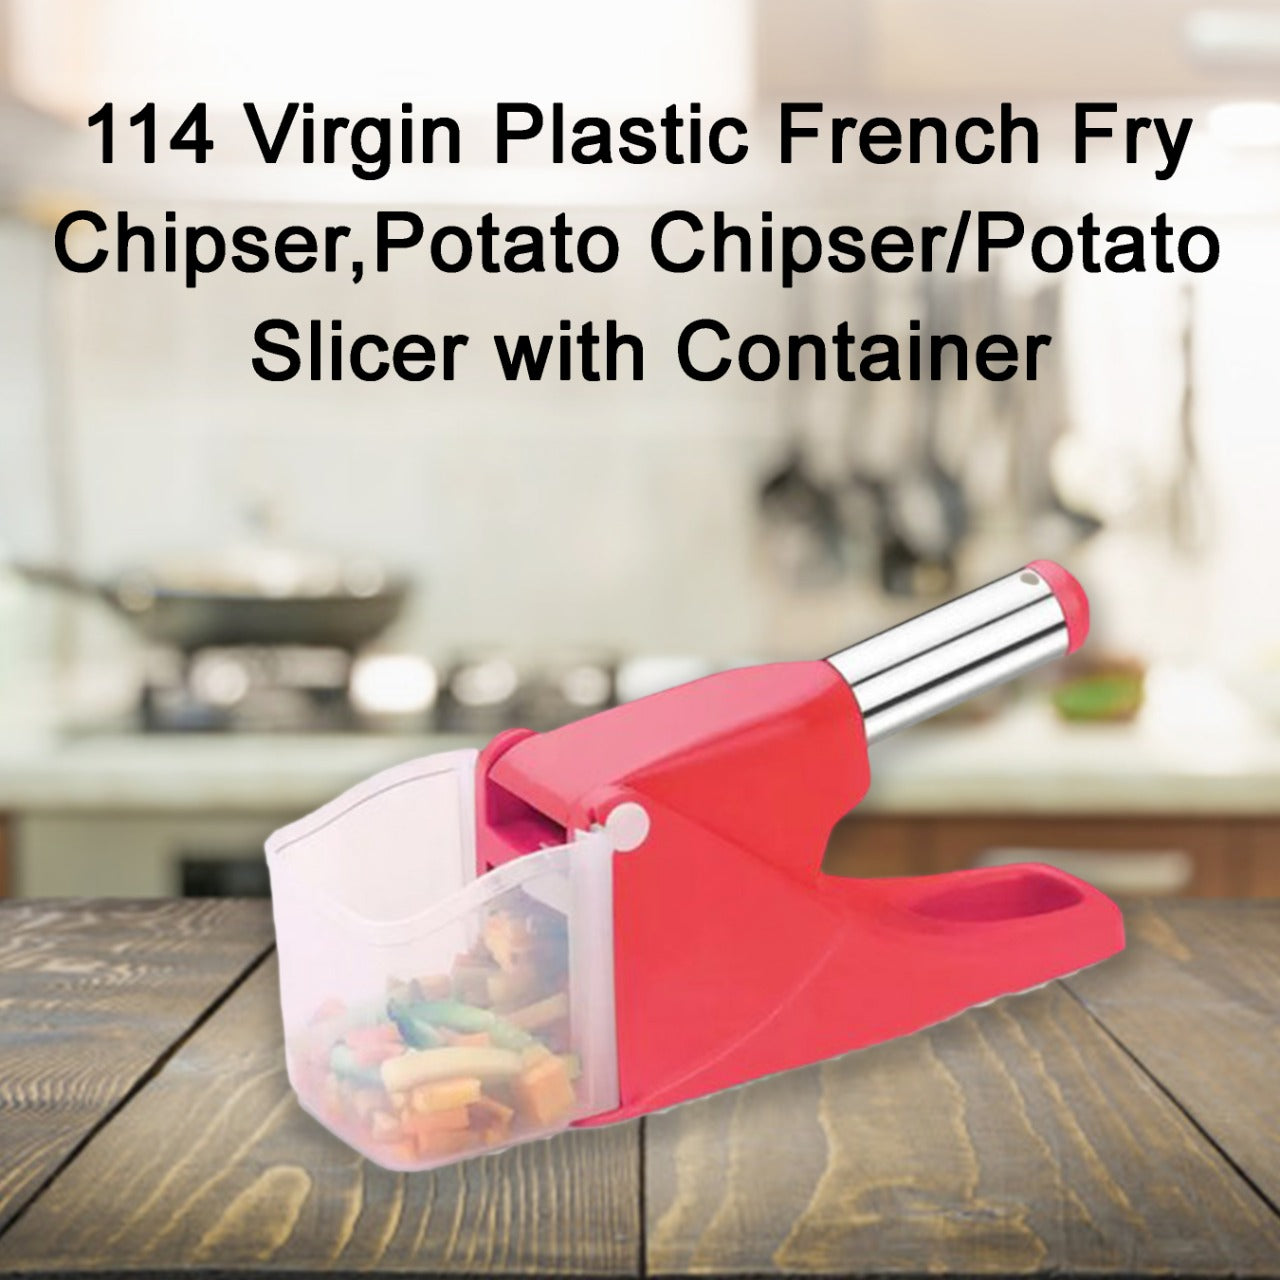 114 Virgin Plastic French Fry Chipser, Potato Chipser/Potato Slicer with Container JK Trends